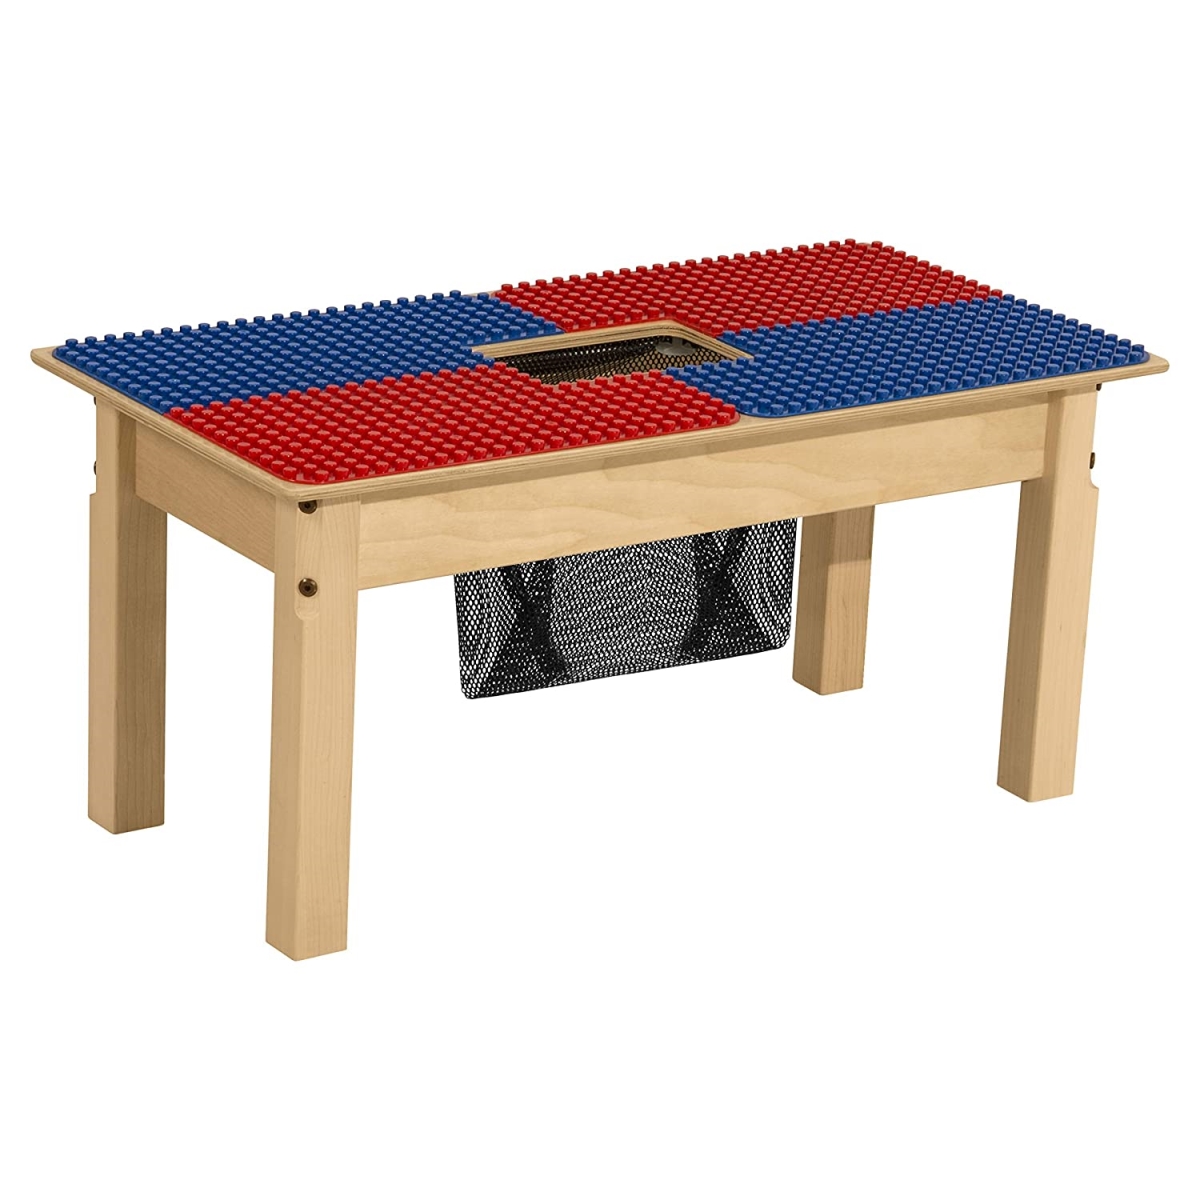 Tp1631pgn14-br 14 In. Duplo Compatible Table With Legs, Blue & Red - Square